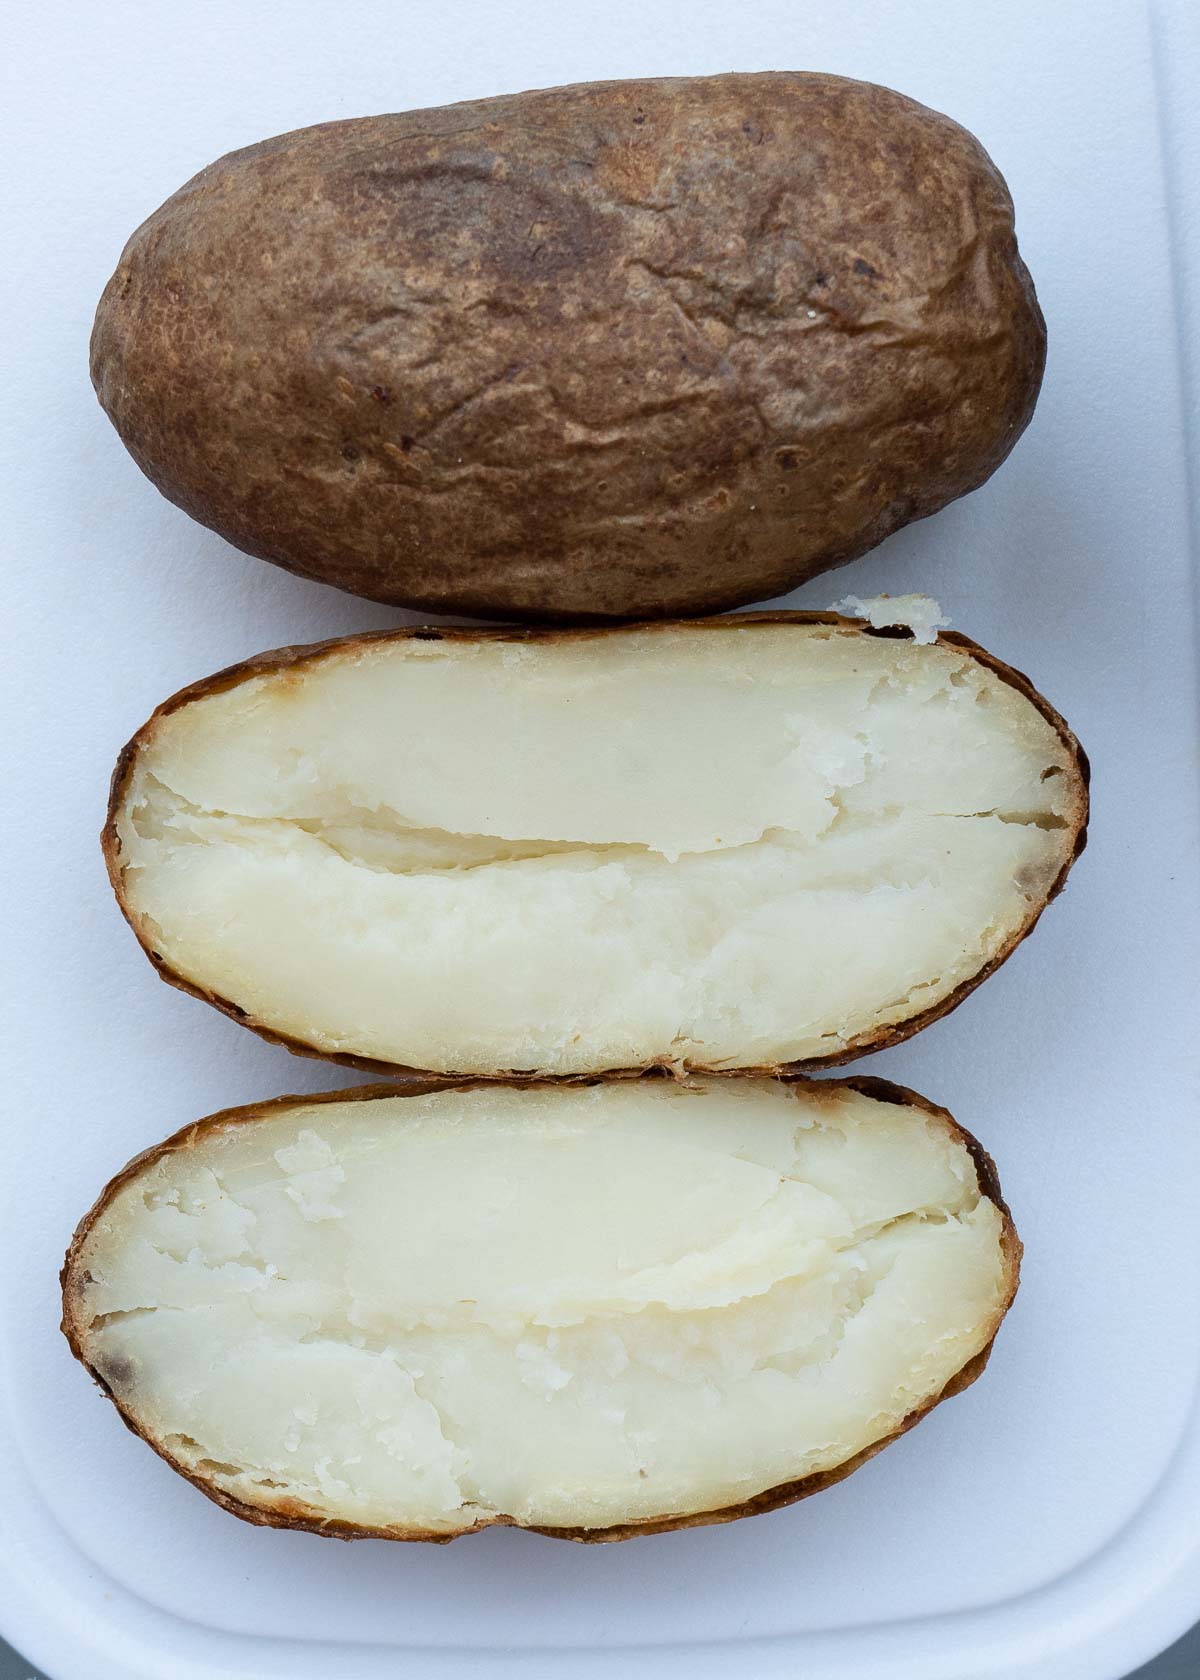 slice in half lengthwise for two separate potato halves.